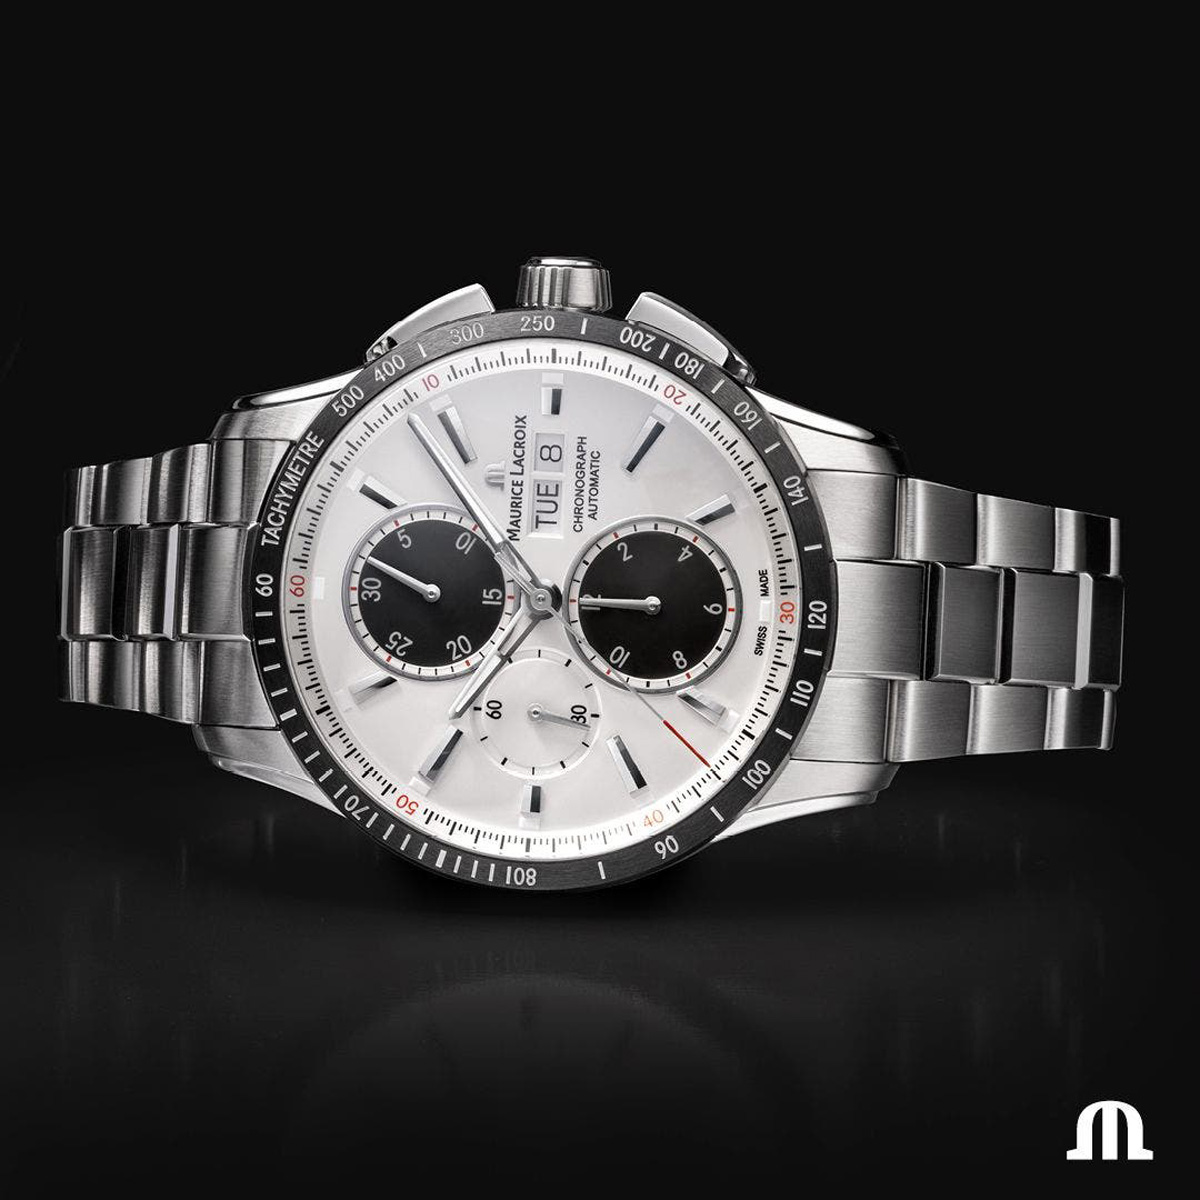 White/Black Pontos Stainless Maurice Jewelers York Band Lacroix New Chronograph S Dial Chicago |